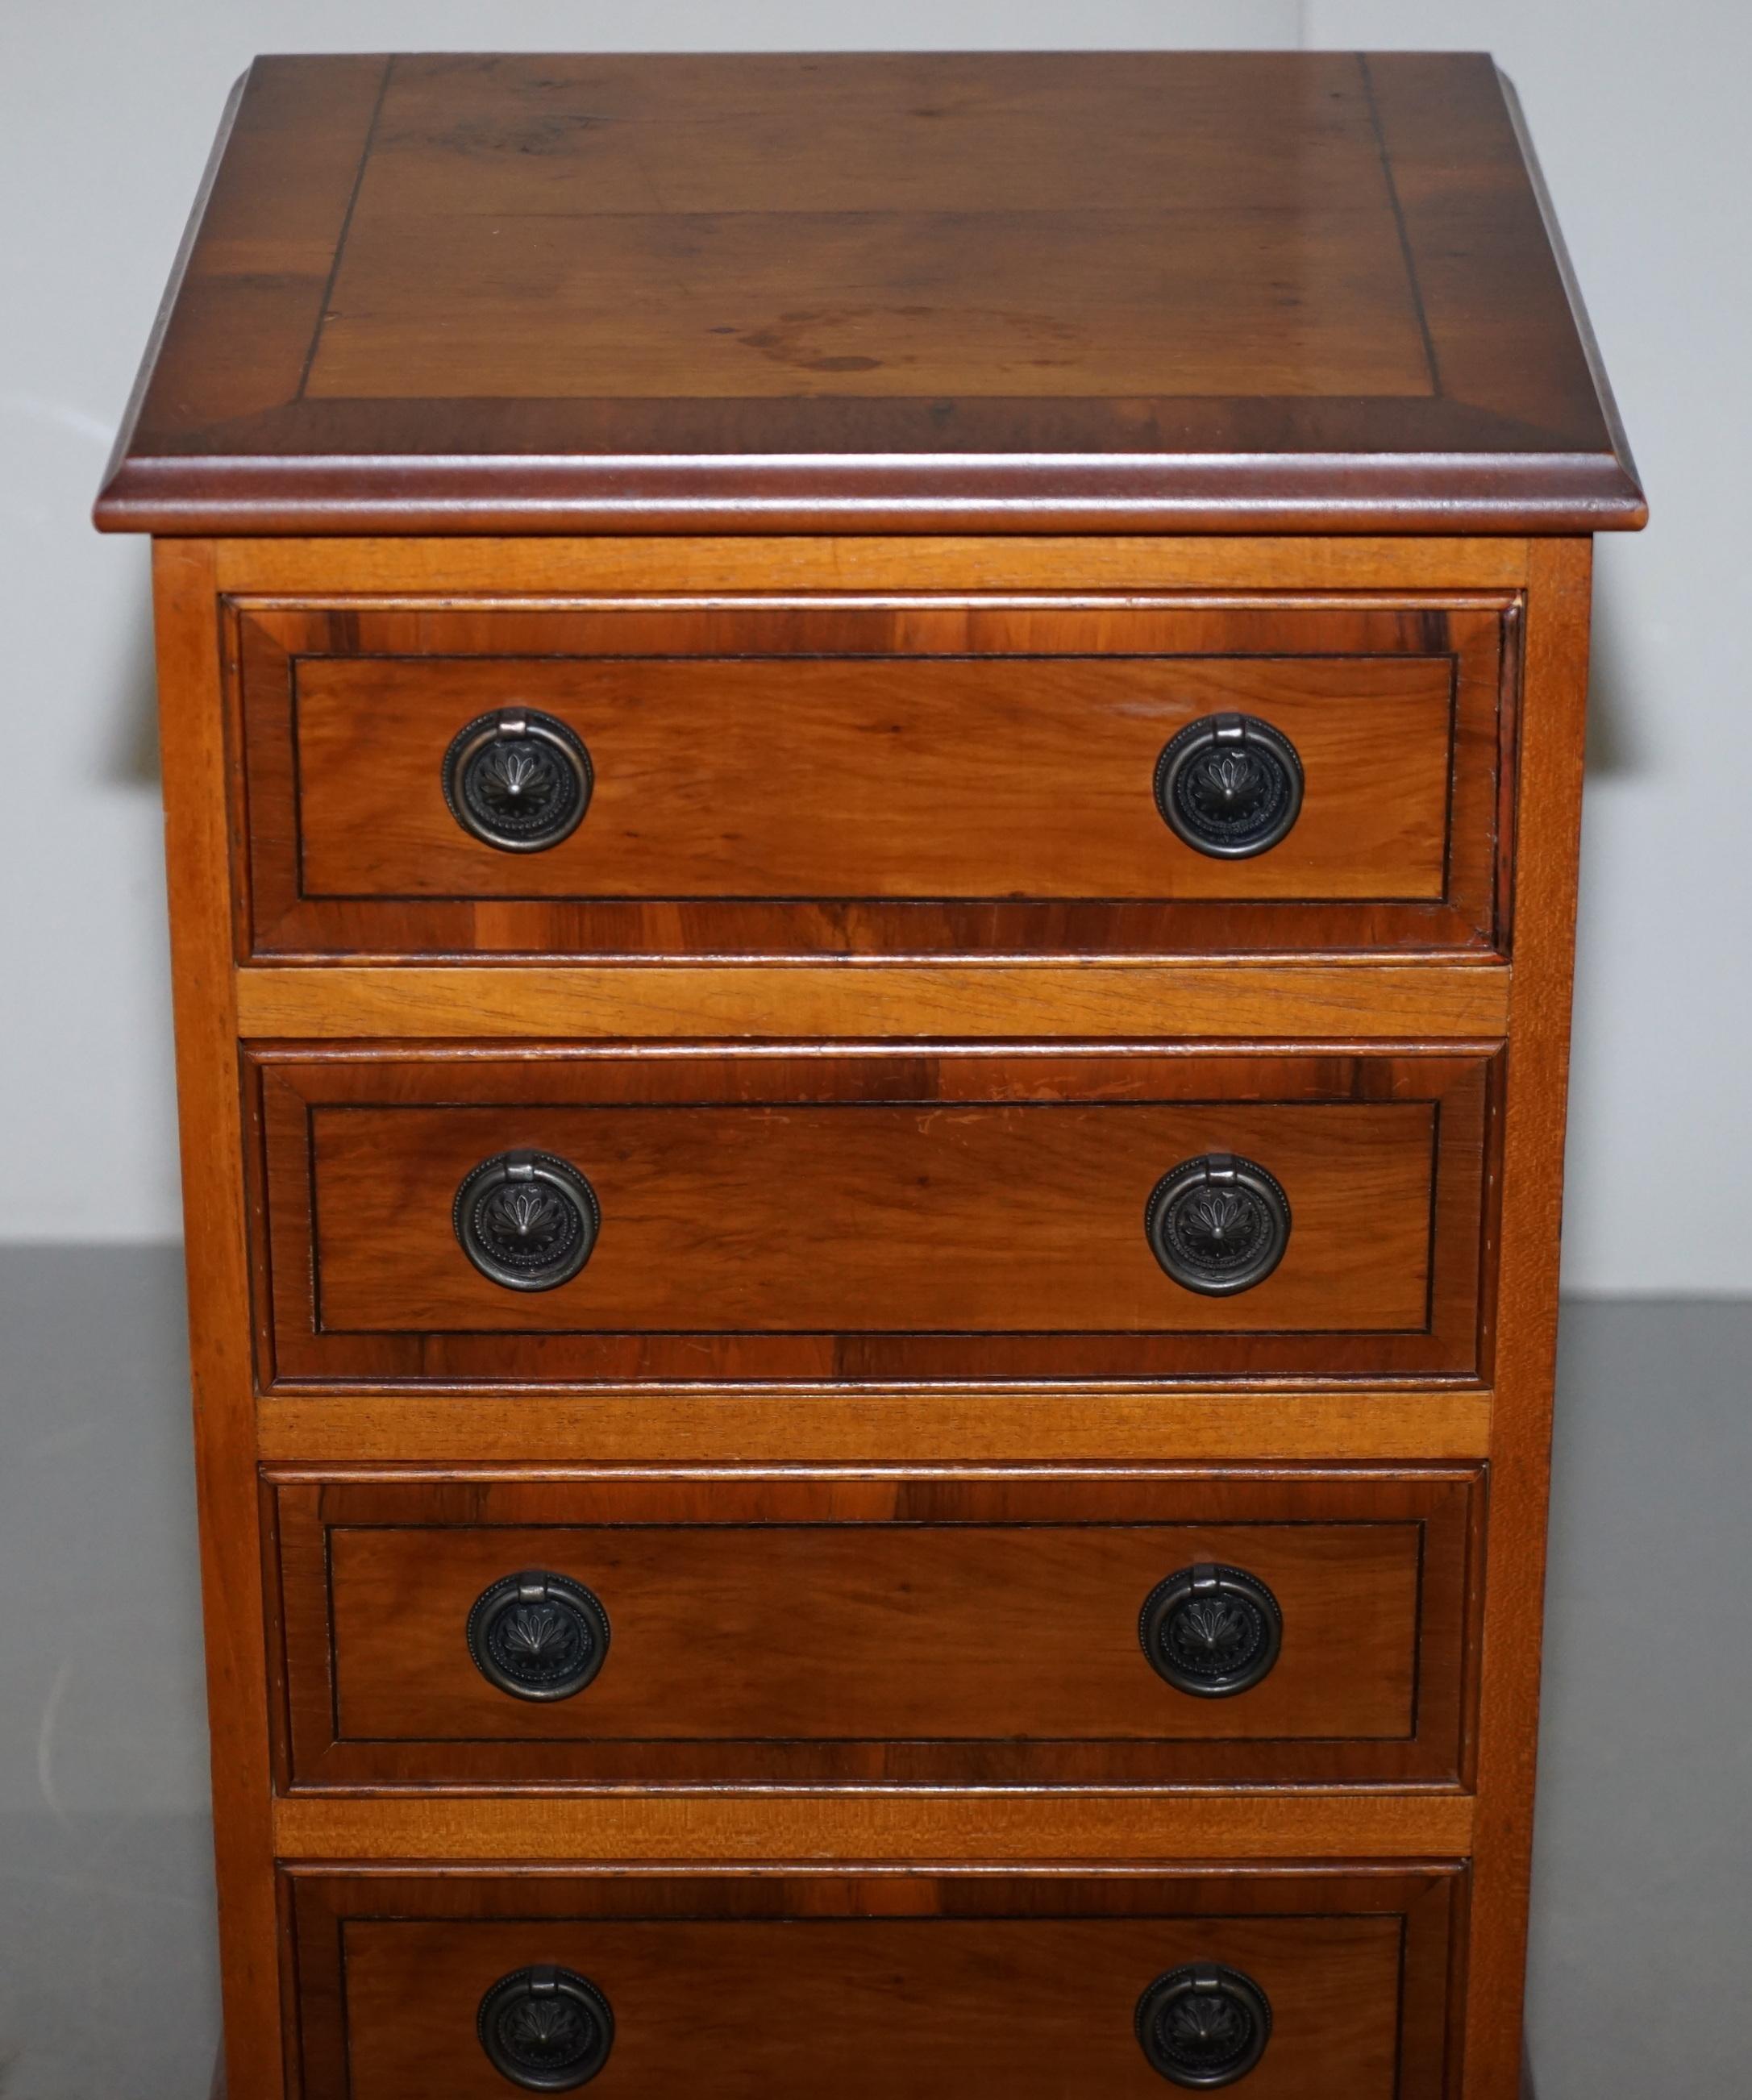 Hand-Crafted Lovely Burr Yew Wood Side Table Sized Chest of Drawers Georgian Style Very Fine